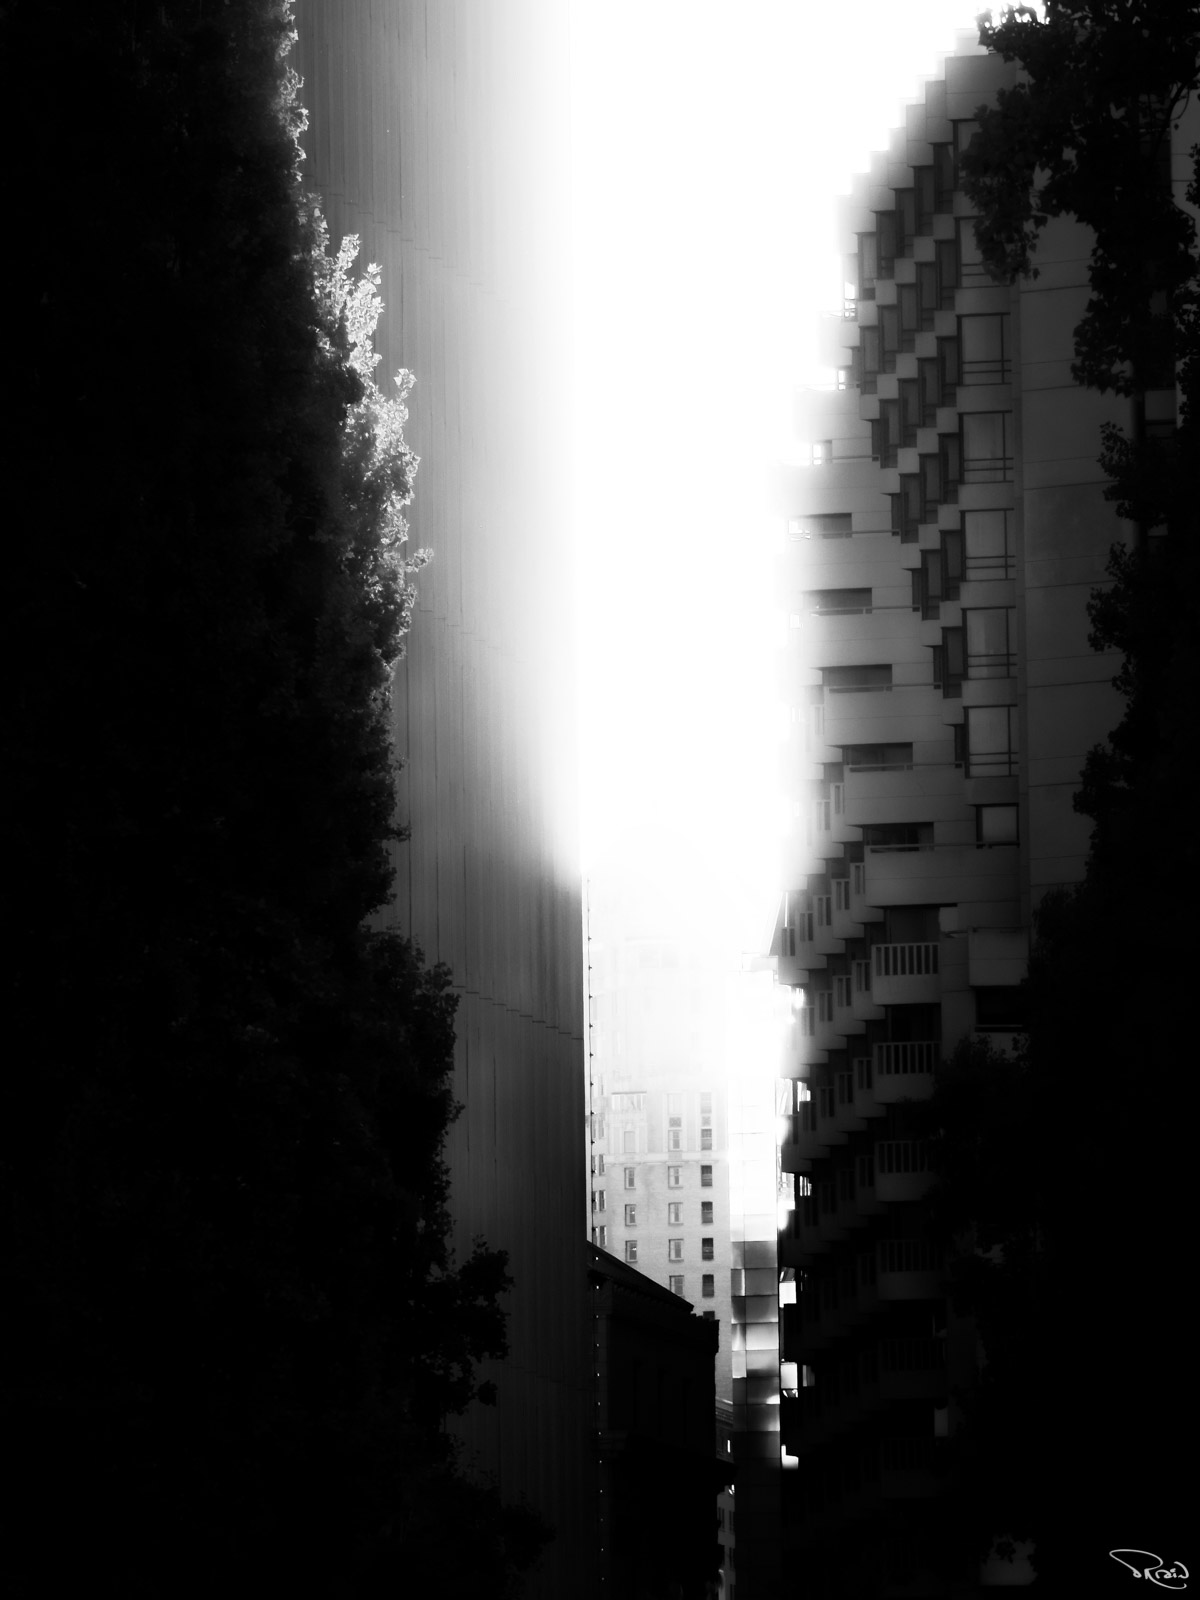 In black-and-white, a misty sunset glow emerges from between two silhouetted skyscrapers in San Francisco, California.